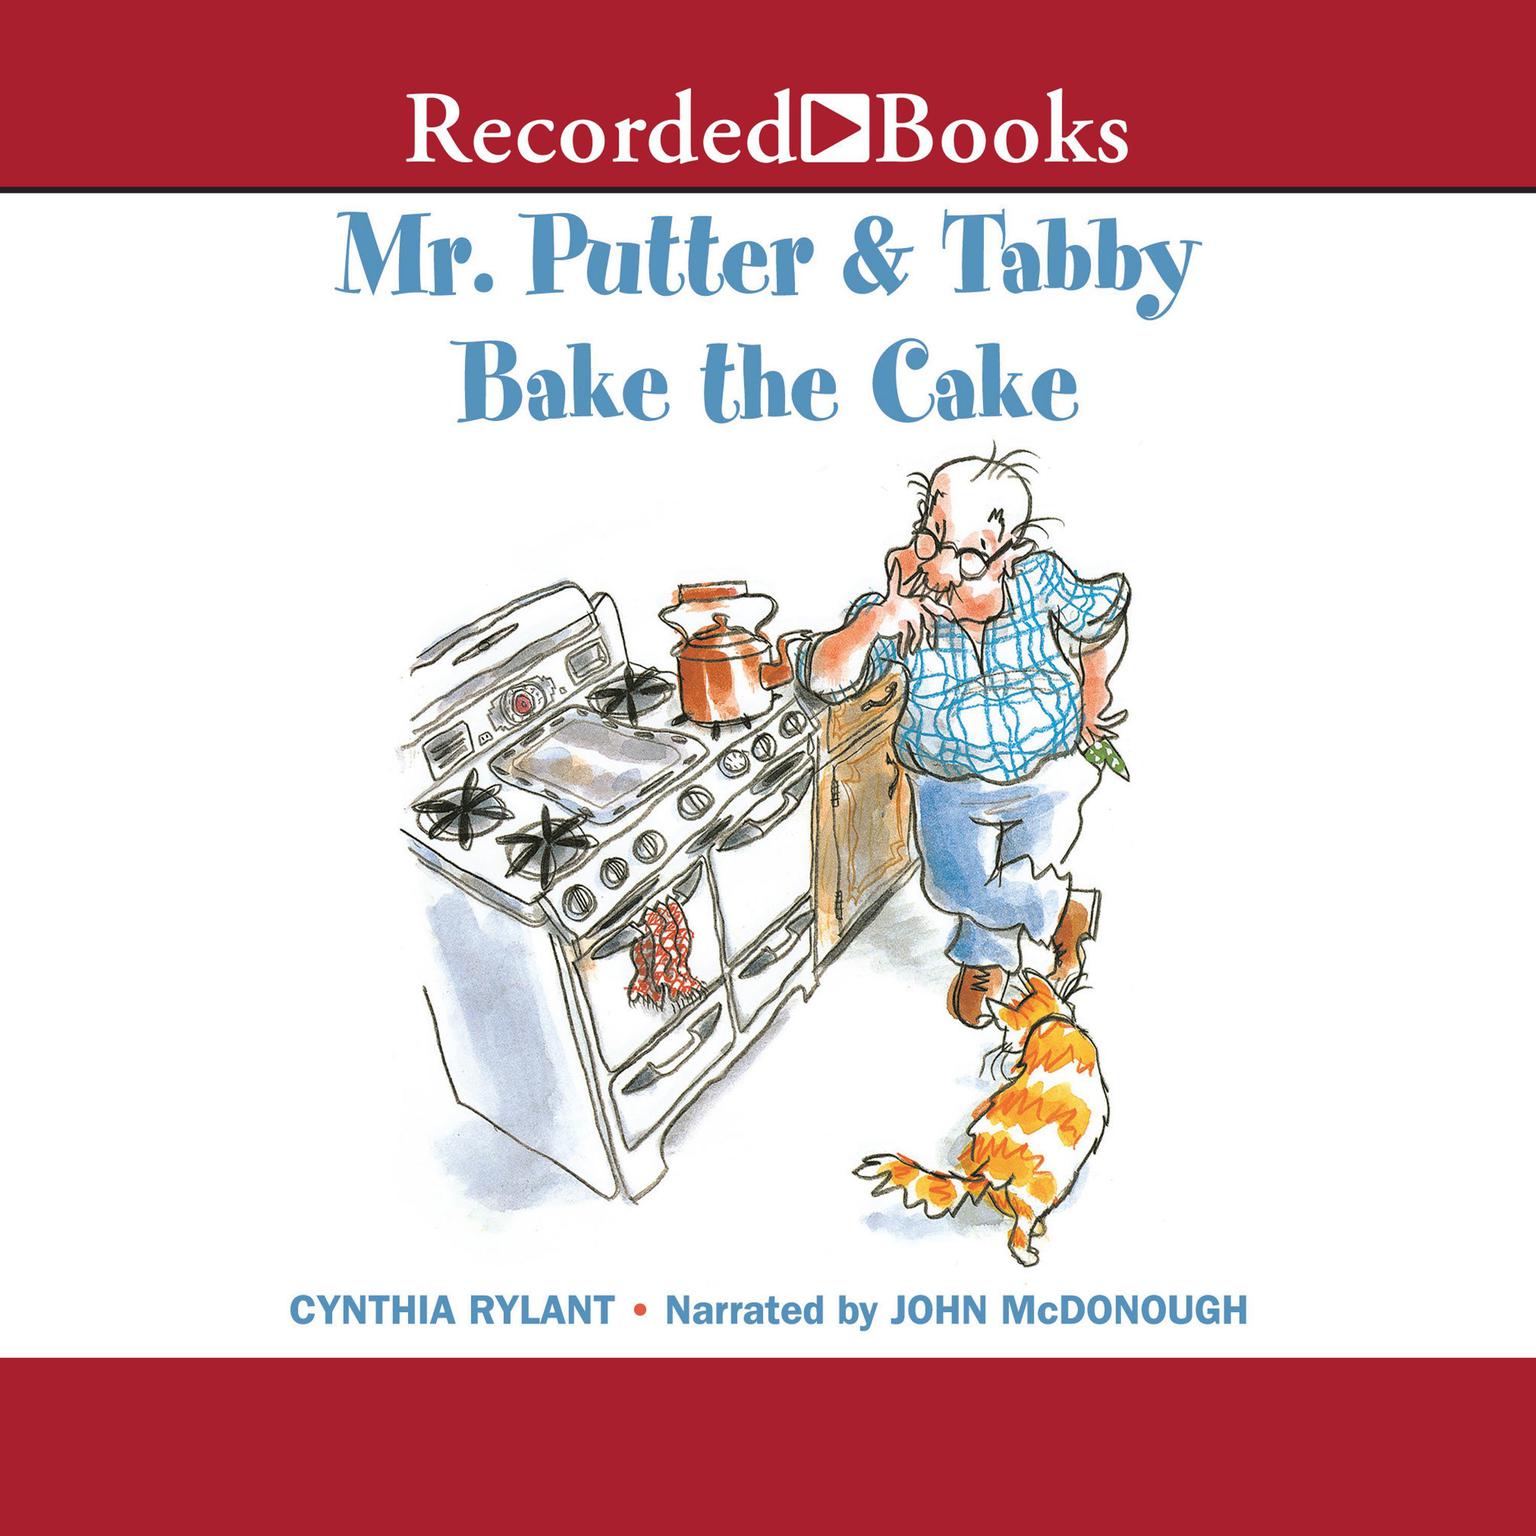 Mr. Putter & Tabby Bake the Cake Audiobook, by Cynthia Rylant